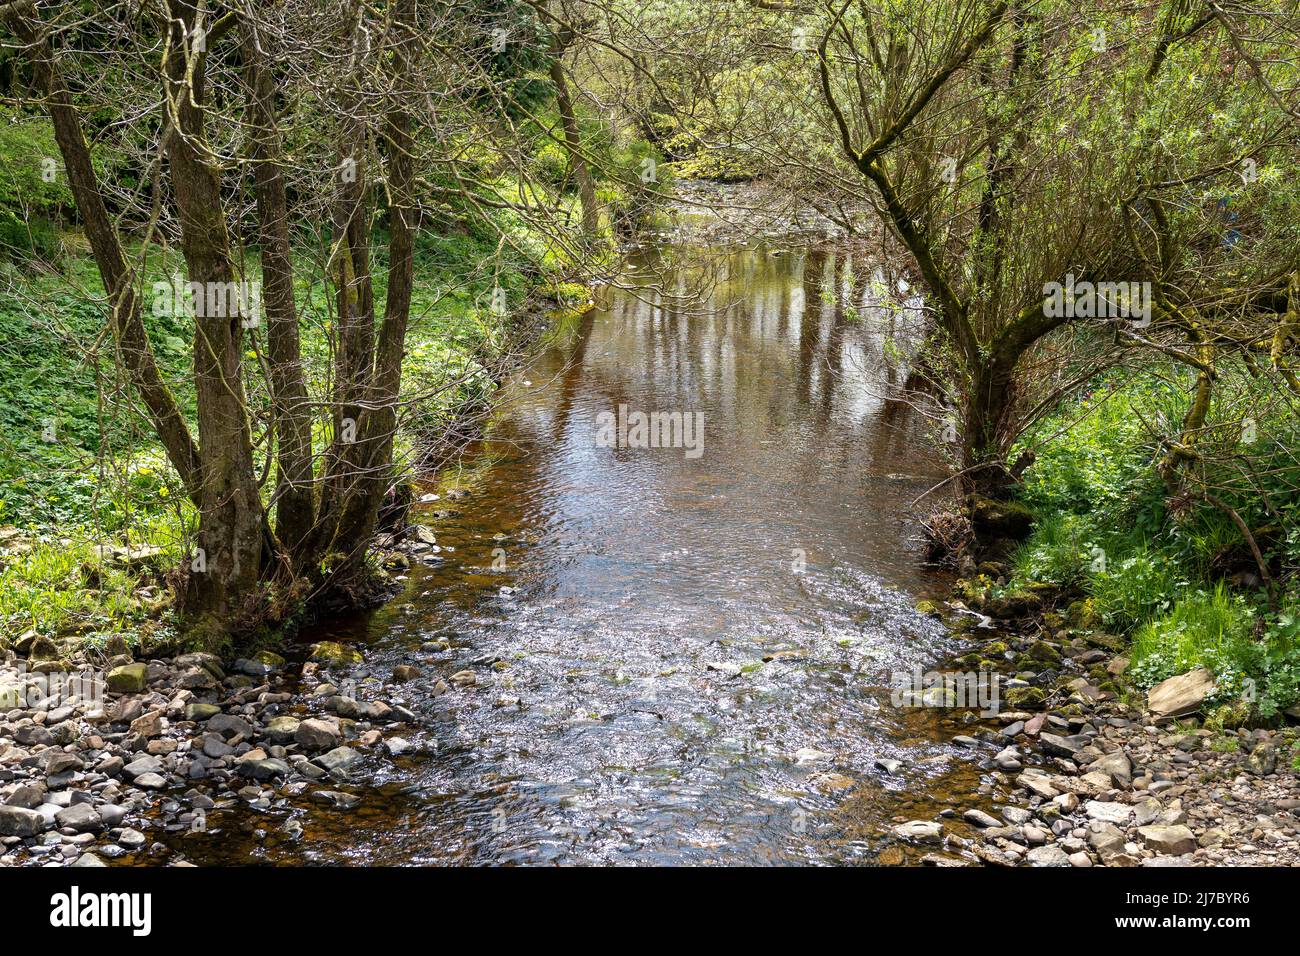 A peaceful spot by a Northumbrian river in Spring. Concept of getting away from it all. Stock Photo